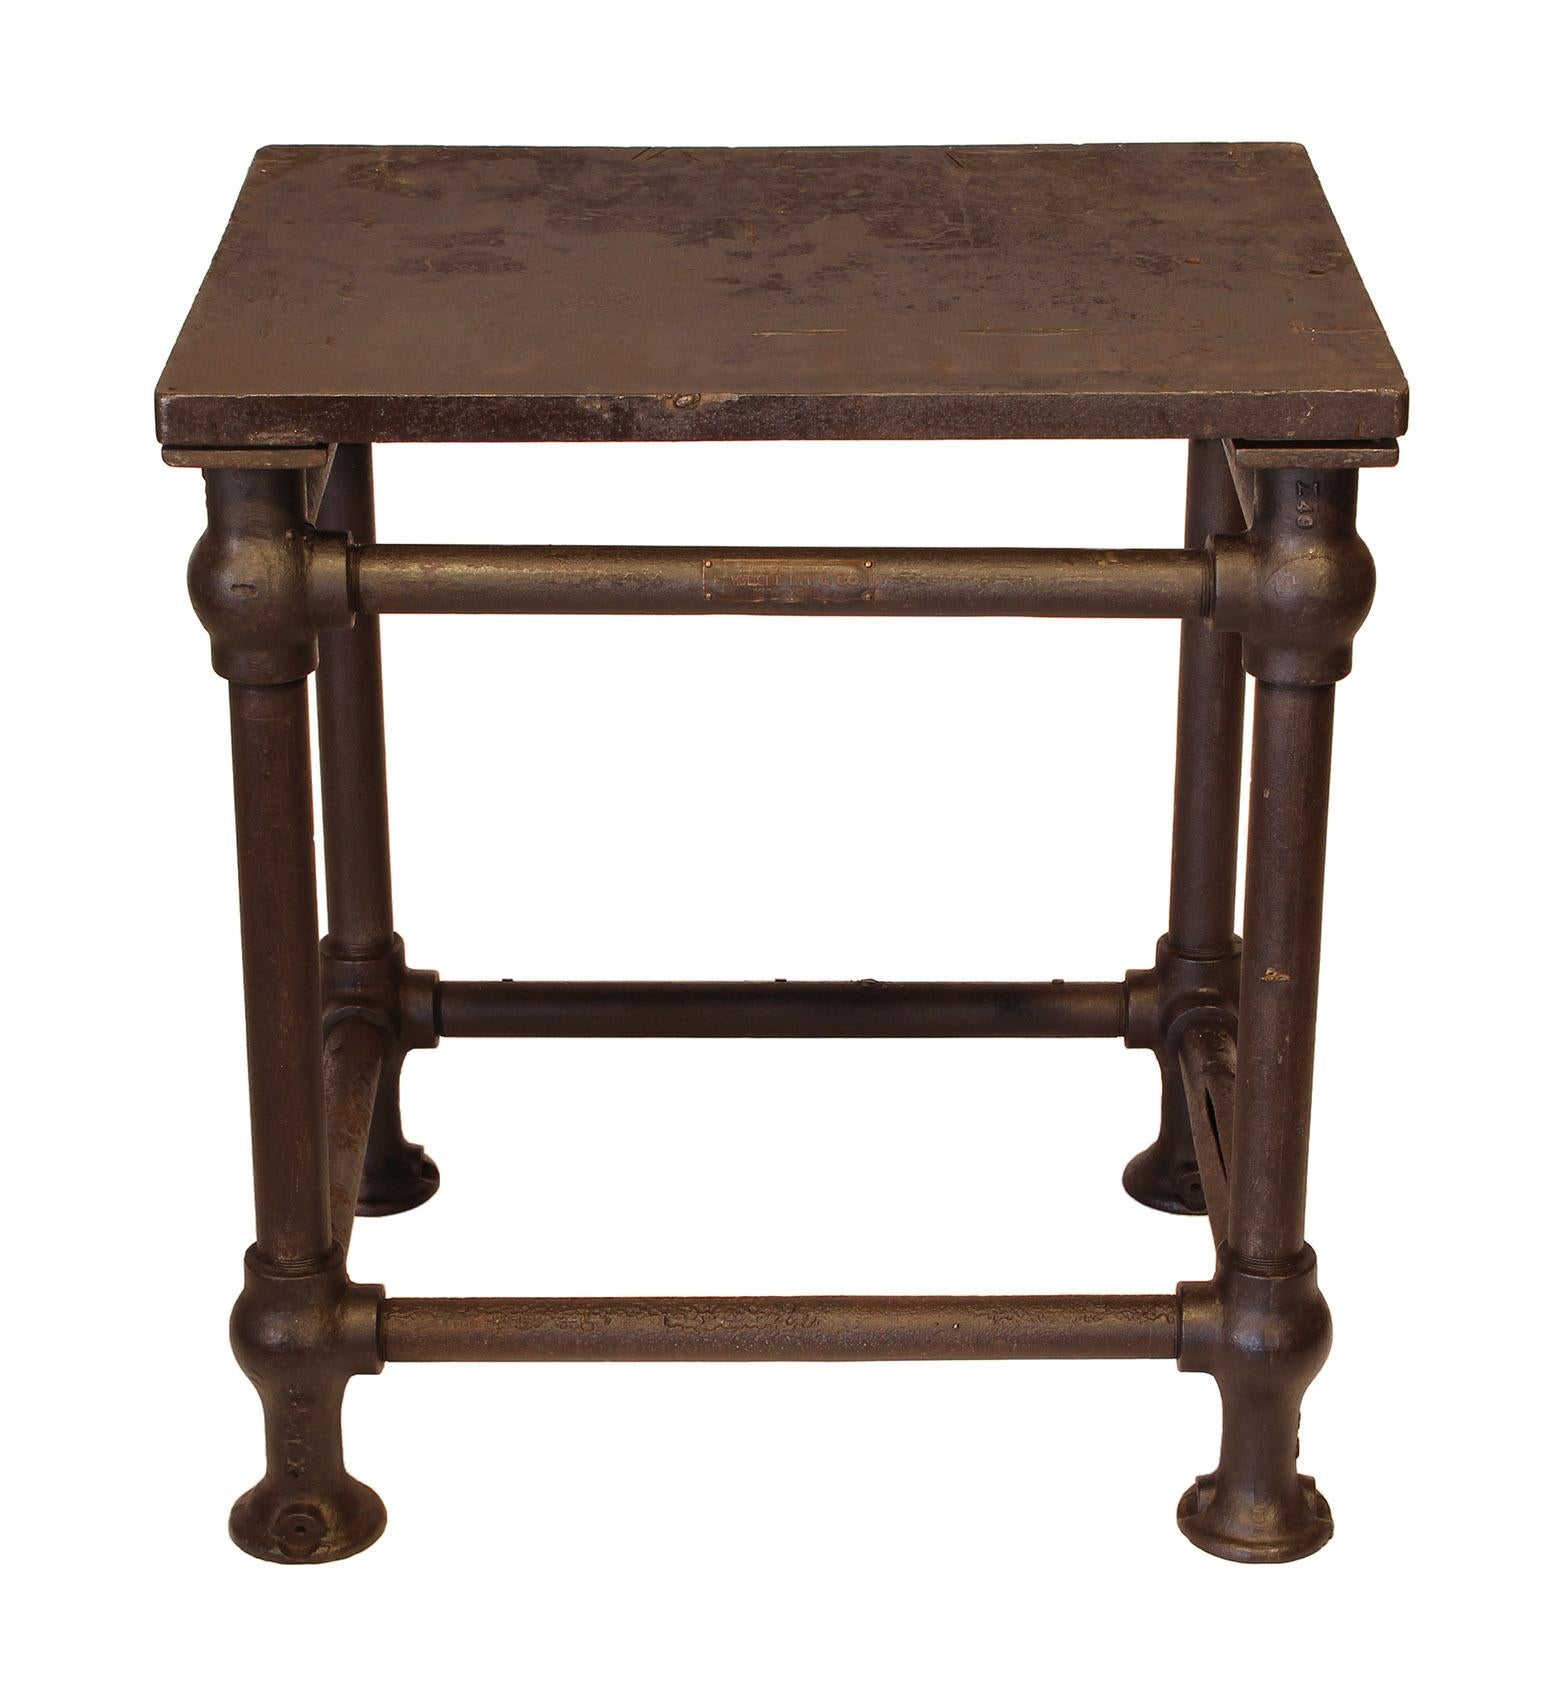 Original American made cast iron and steel industrial stationary printers letterpress table. This 'Turtle Table' was used in the printmaking industry for making up printing forms. Features 11/8